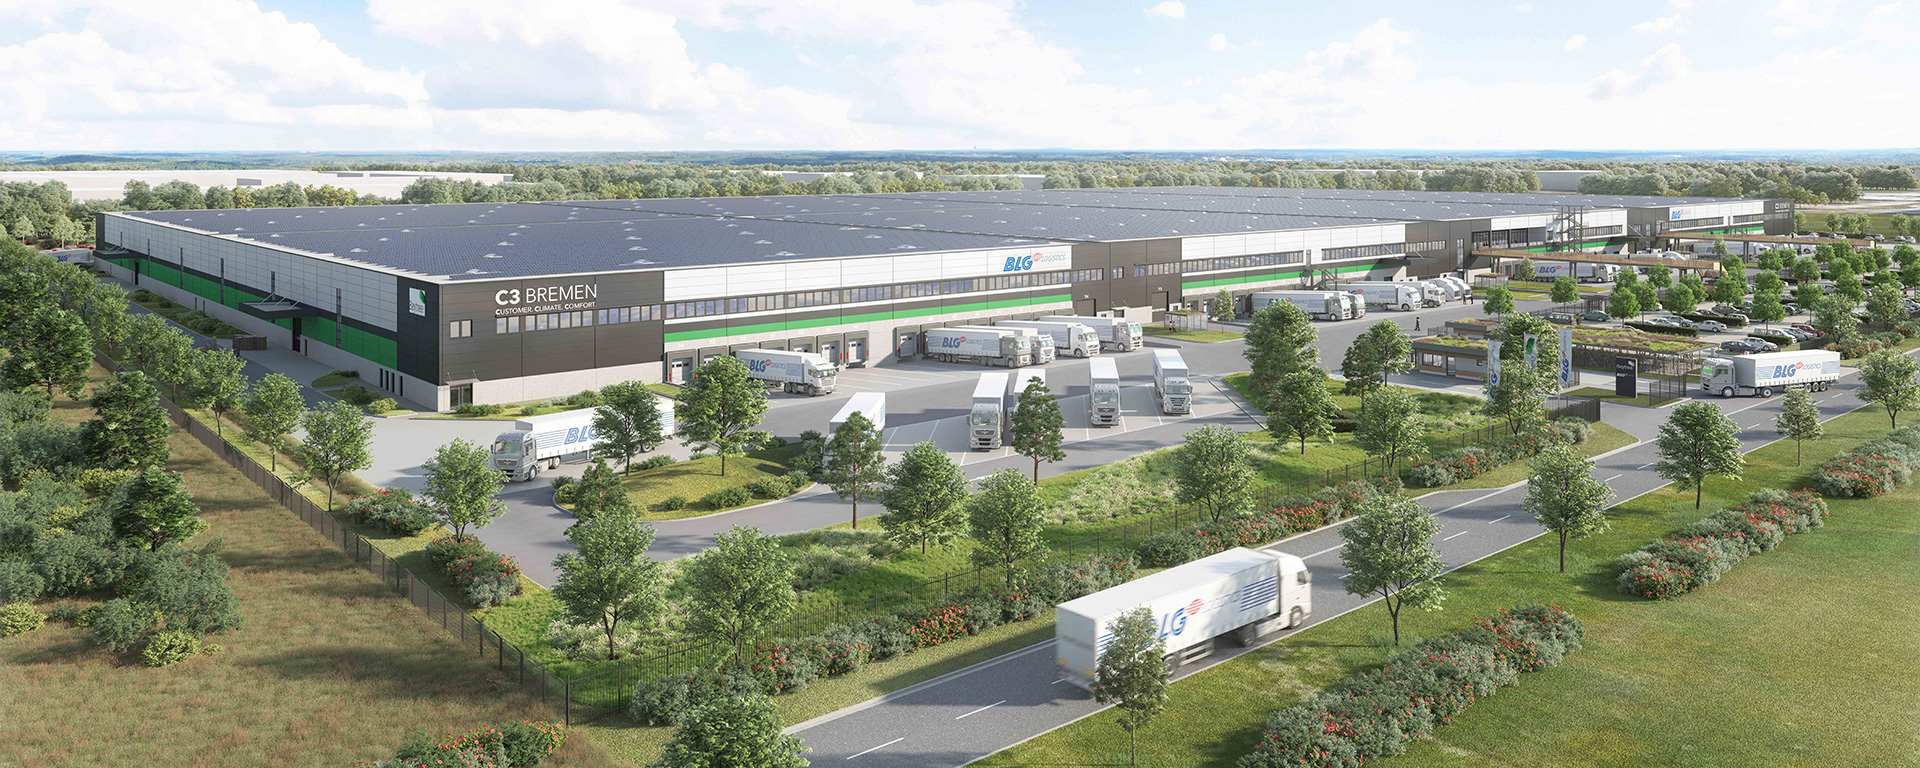 C3 Bremen: Green logistics center also a model for future projects